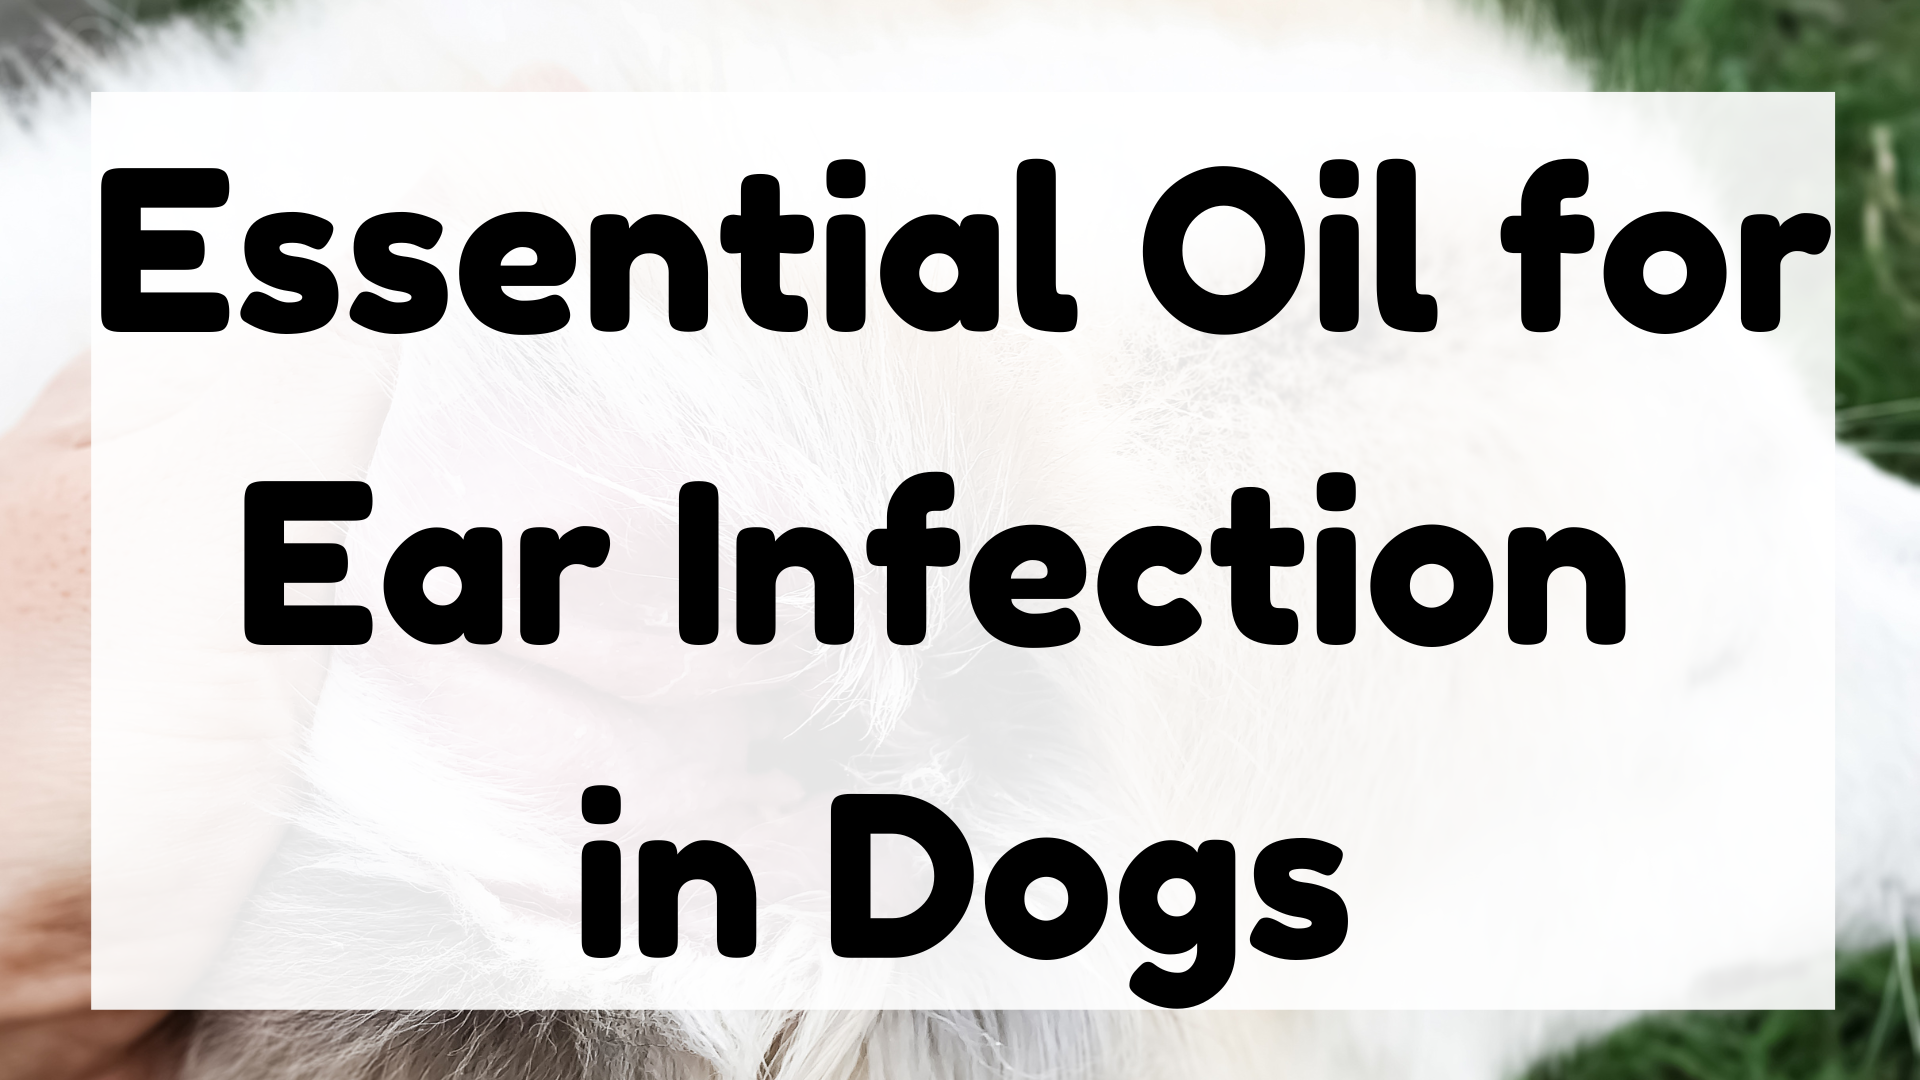 Essential Oil for Ear Infection in Dogs featured image